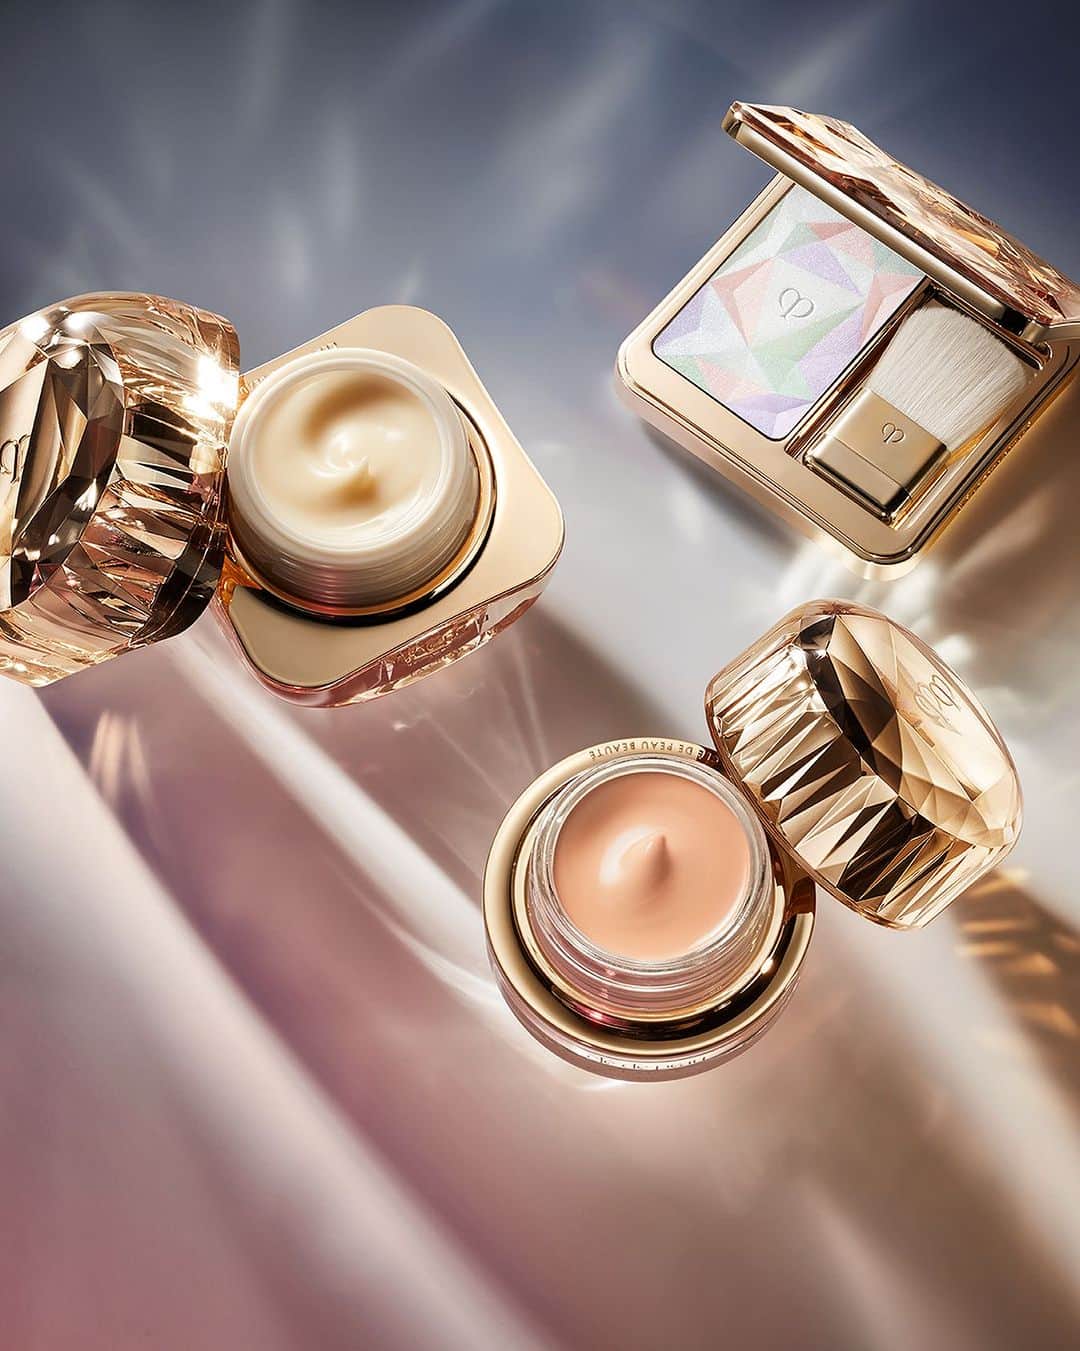 Clé de Peau Beauté Officialのインスタグラム：「Put your best face forward with #TheFoundation, an ultra-luxurious product that combines makeup with skincare. This unique formulation provides flawless coverage from day to night, and is the perfect base for #TheLuminizingFaceEnhancer. For an extra shot of hydration, complete your nighttime routine with #LaCreme 🤍  メイクアップとスキンケアを融合させたクレ・ド・ポー ボーテ #ルフォンドゥタンｎ で、別次元の美しさへと導きます。つけたての輝く美しい仕上がりが１日中*持続し、クレ・ド・ポー ボーテ #ルレオスールデクラ と相性がよく合います。 夜のお手入れにはクレ・ド・ポー ボーテ #ラクレーム （医薬部外品）を🤍  *24 時間化粧持ち（輝きのあるつや・テカリ・ヨレ・色くすみのなさ）データ取得済み」